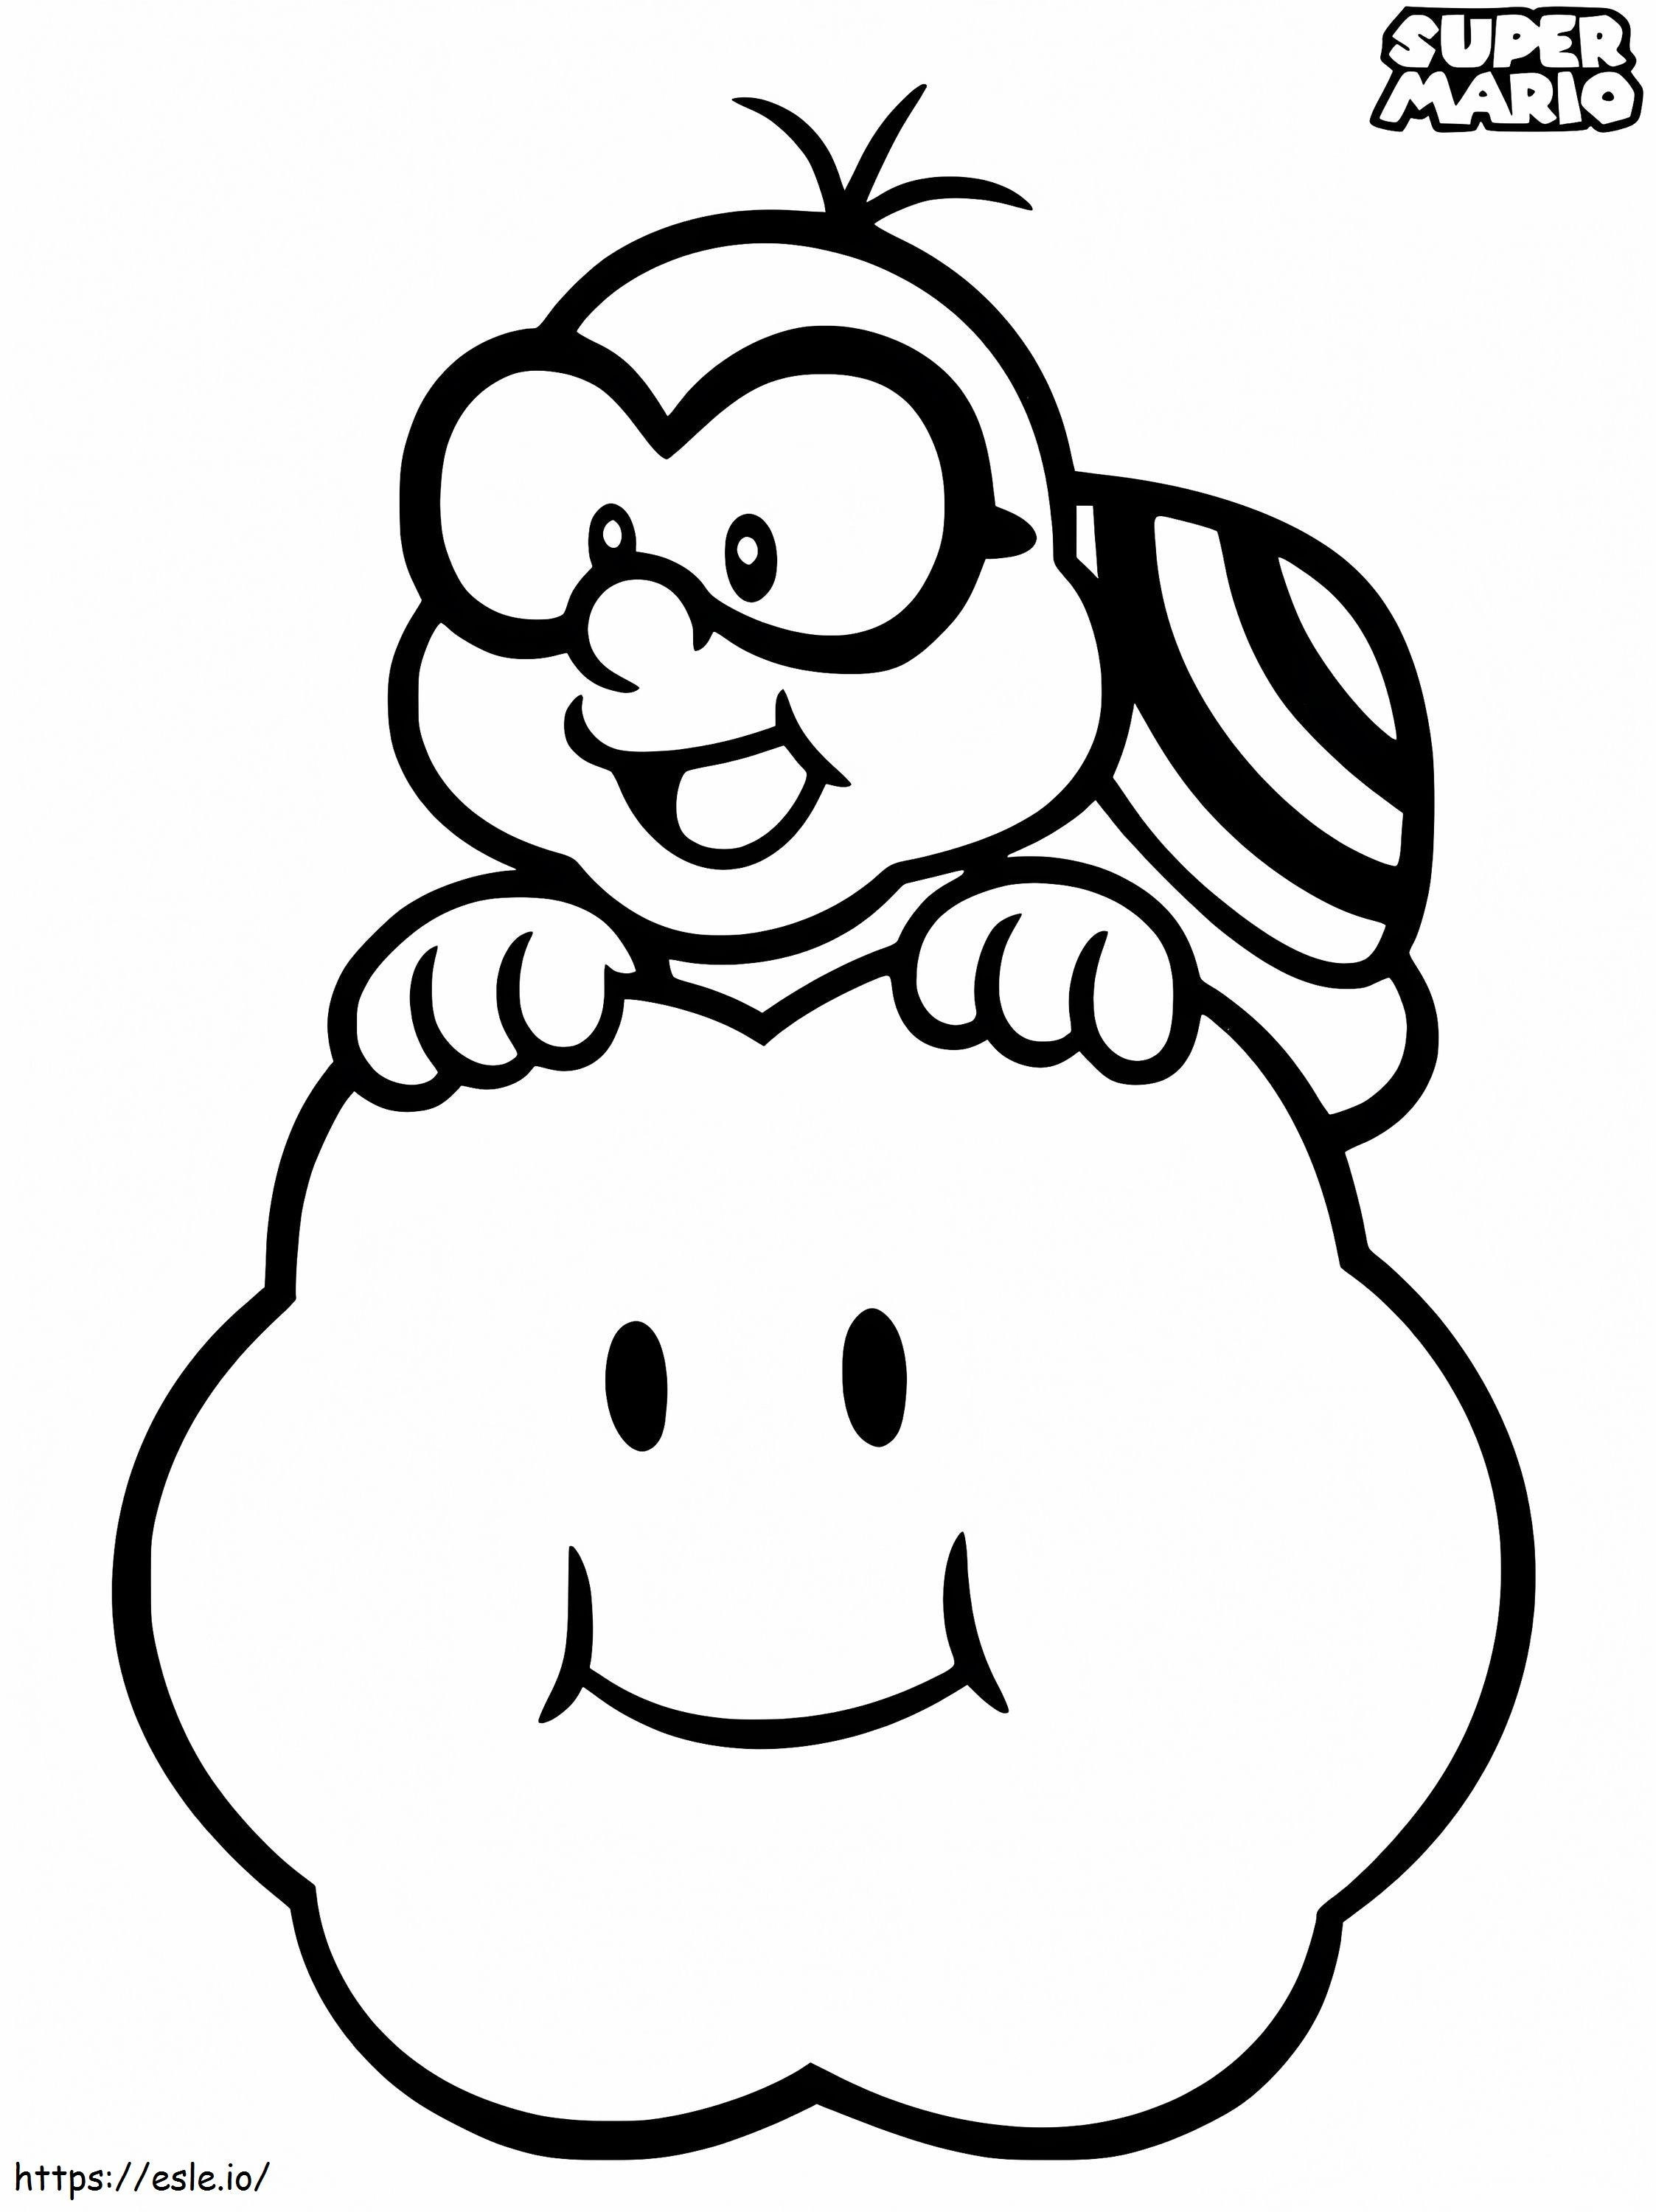 Unvarnished Super Mario coloring page